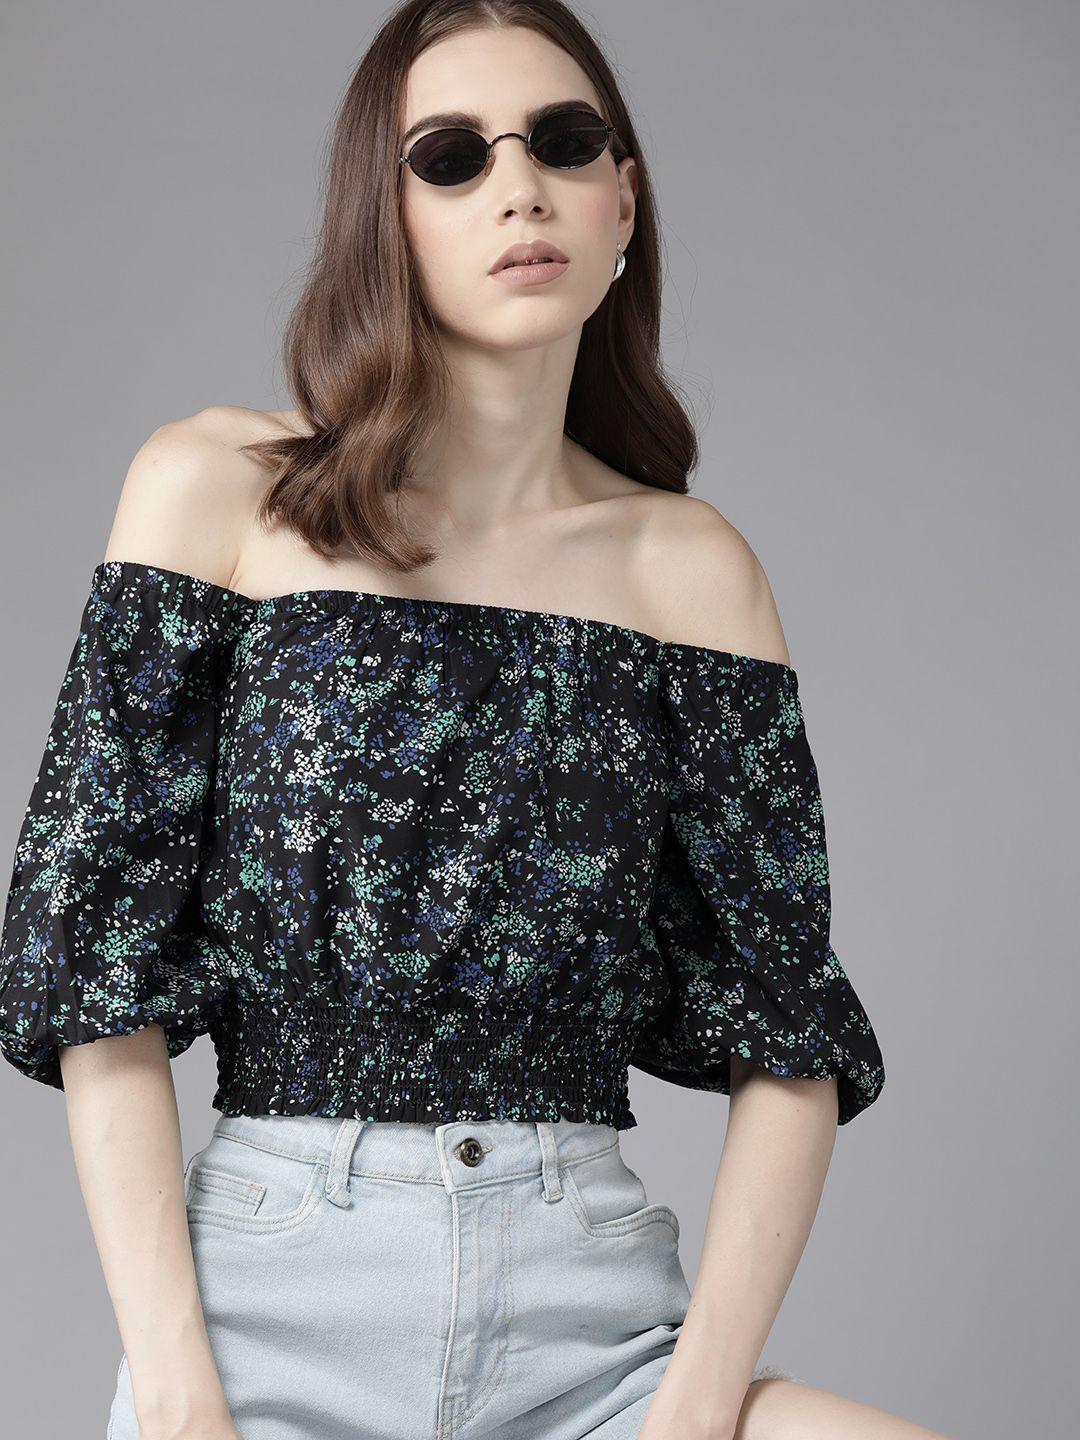 the roadster lifestyle co. printed off-shoulder bardot crop top